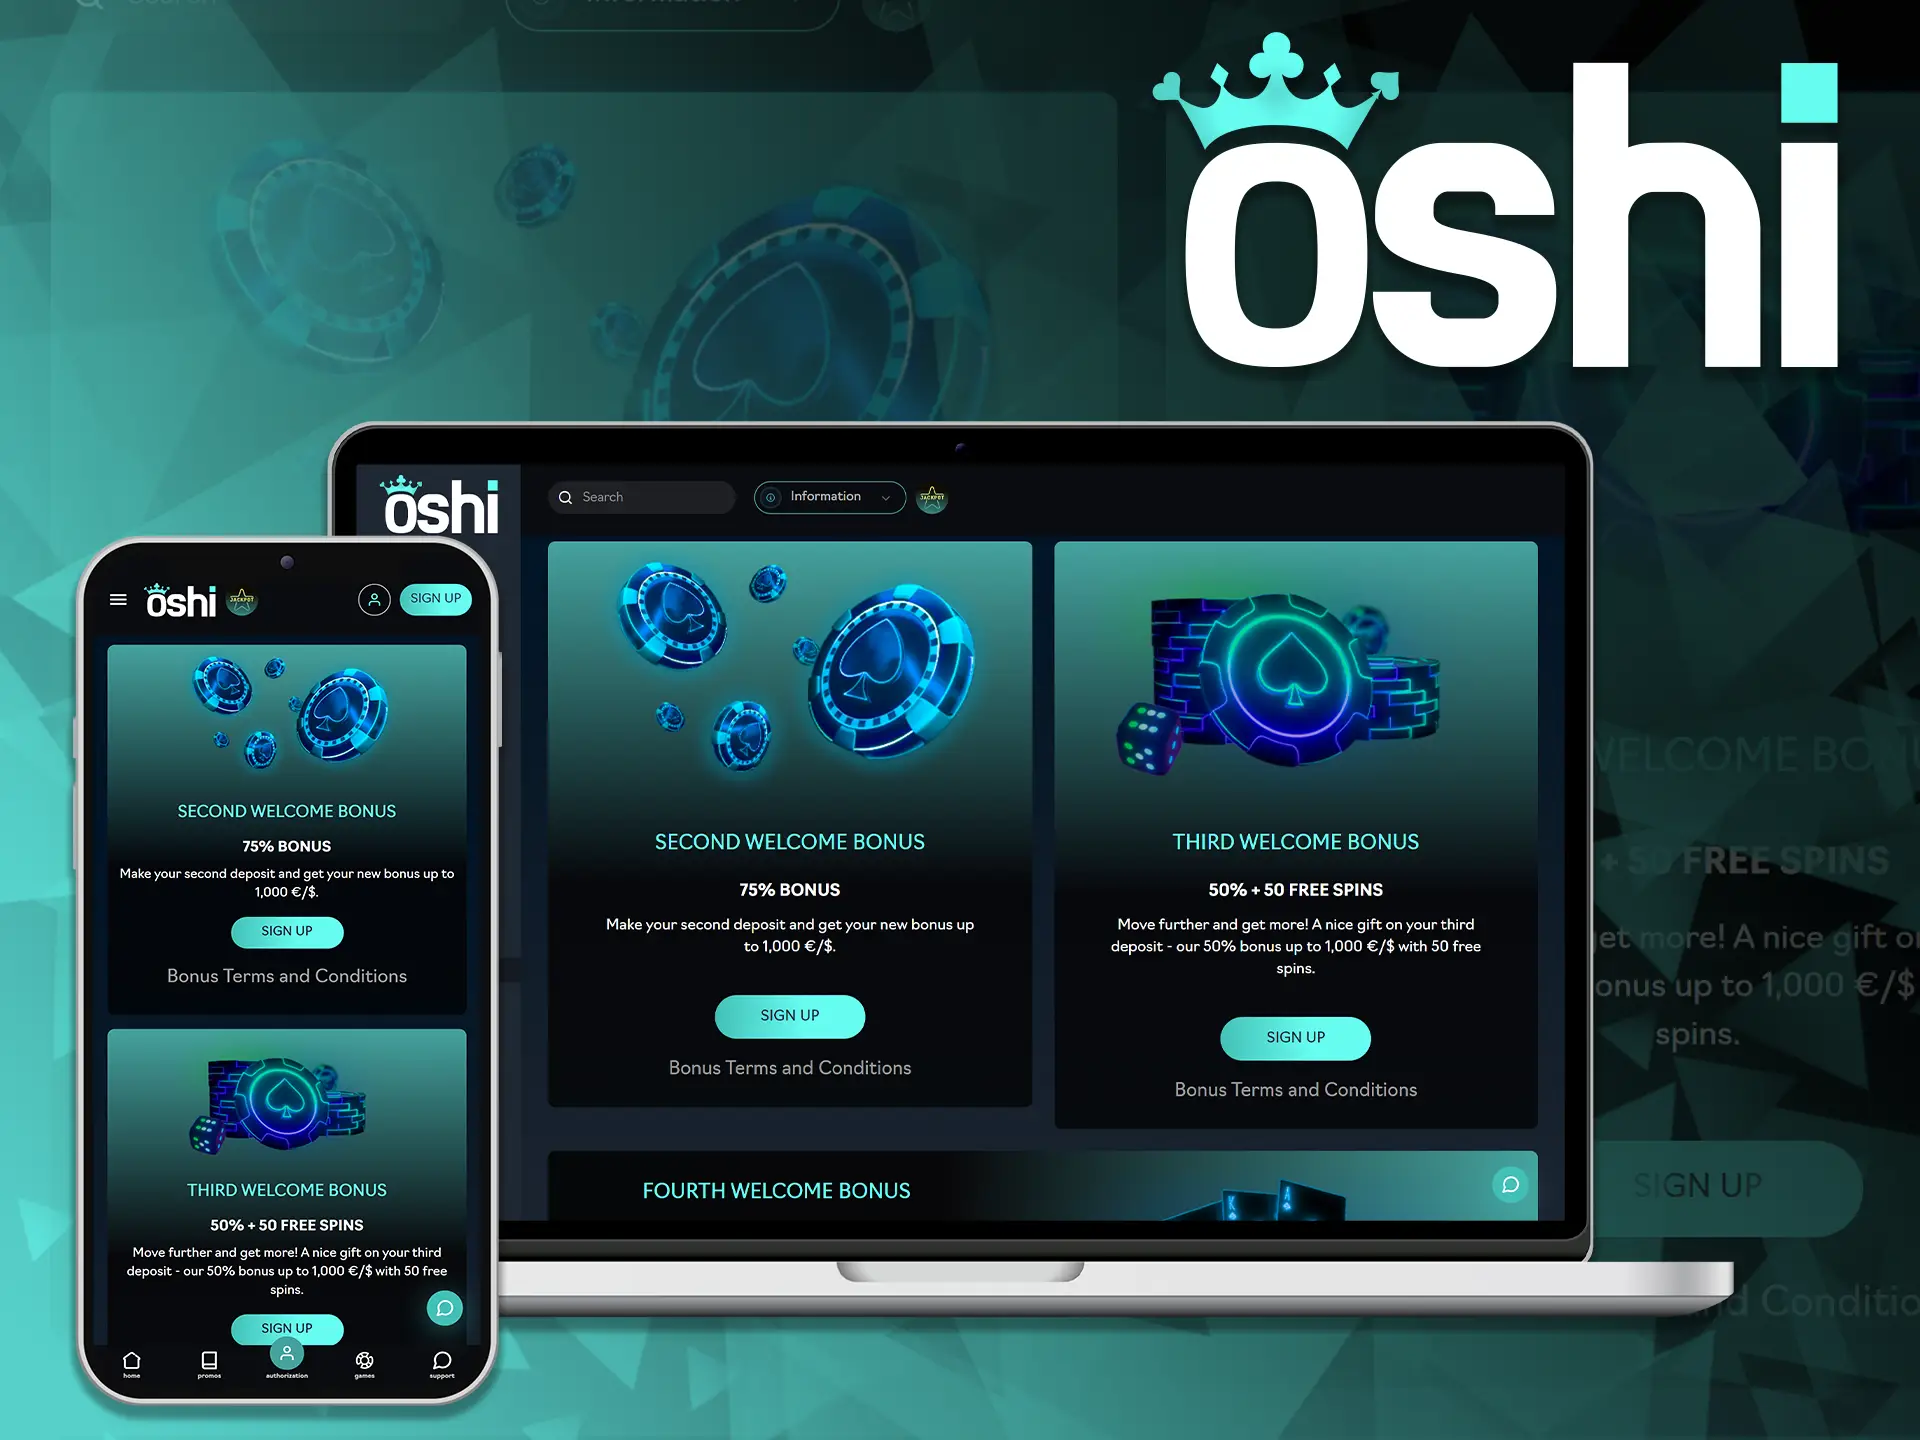 Get up to $6,000 AUD in welcome bonuses across your first 4 deposits at Oshi Online Casino!